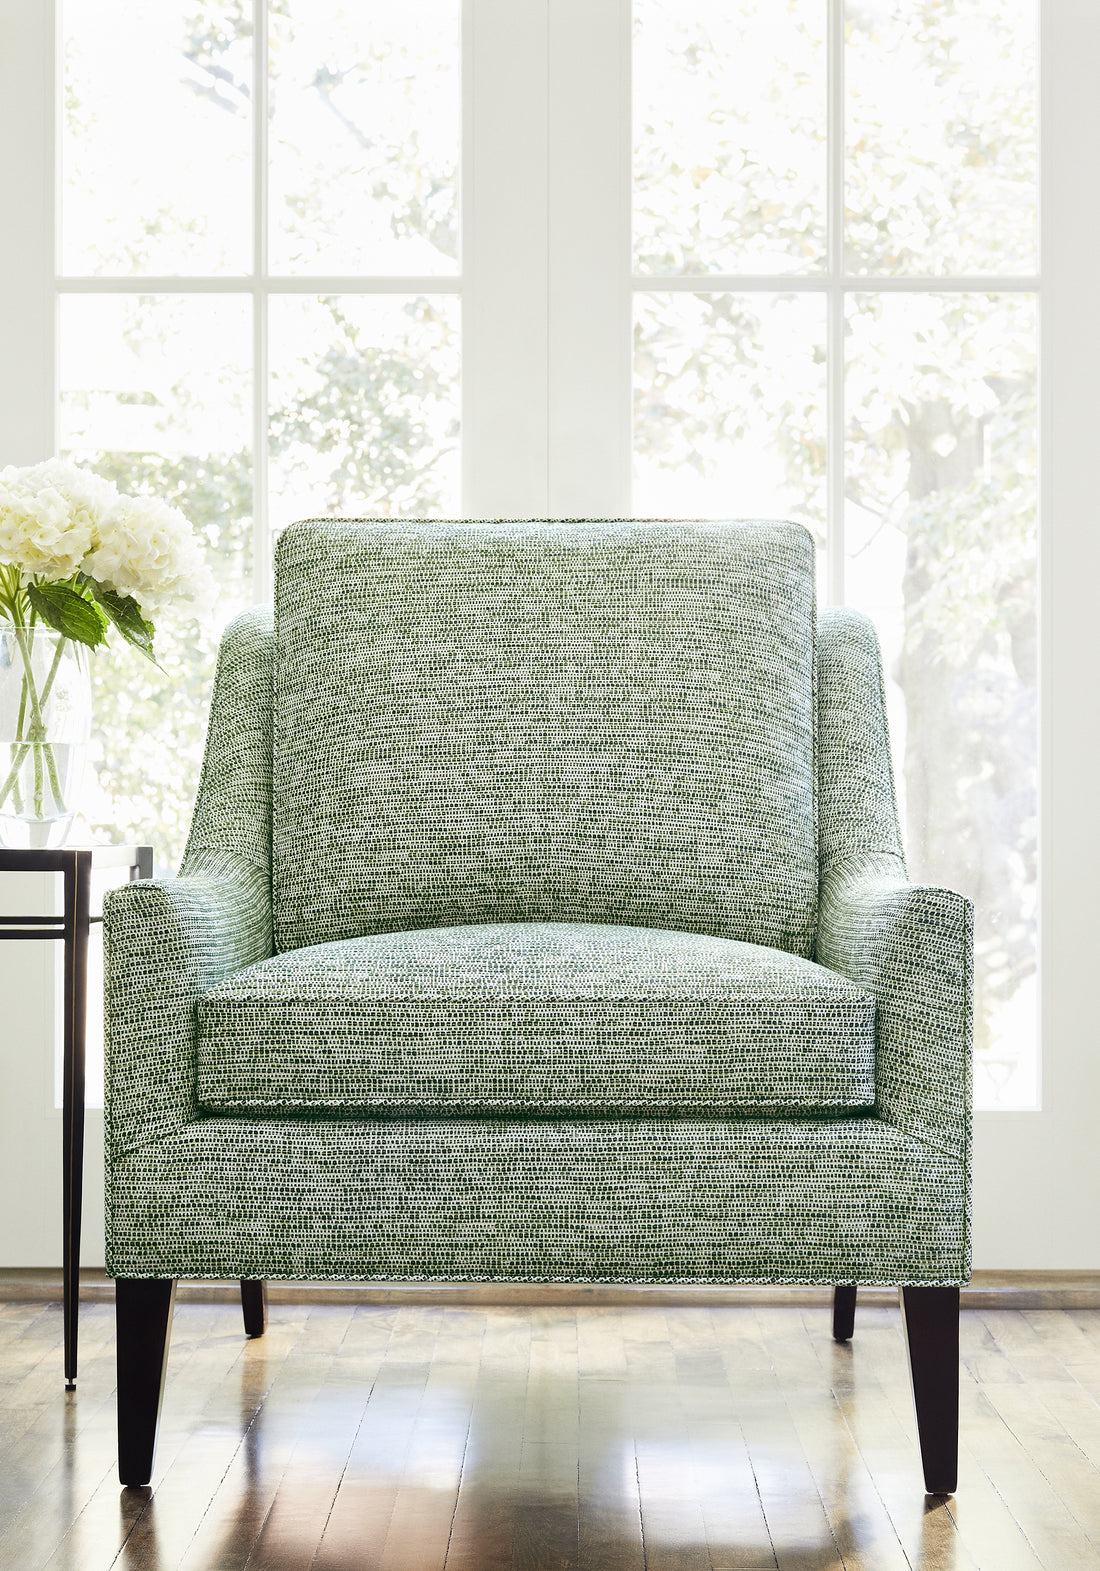 Alexander Chair in Thibaut Borealis woven fabric in Emerald color